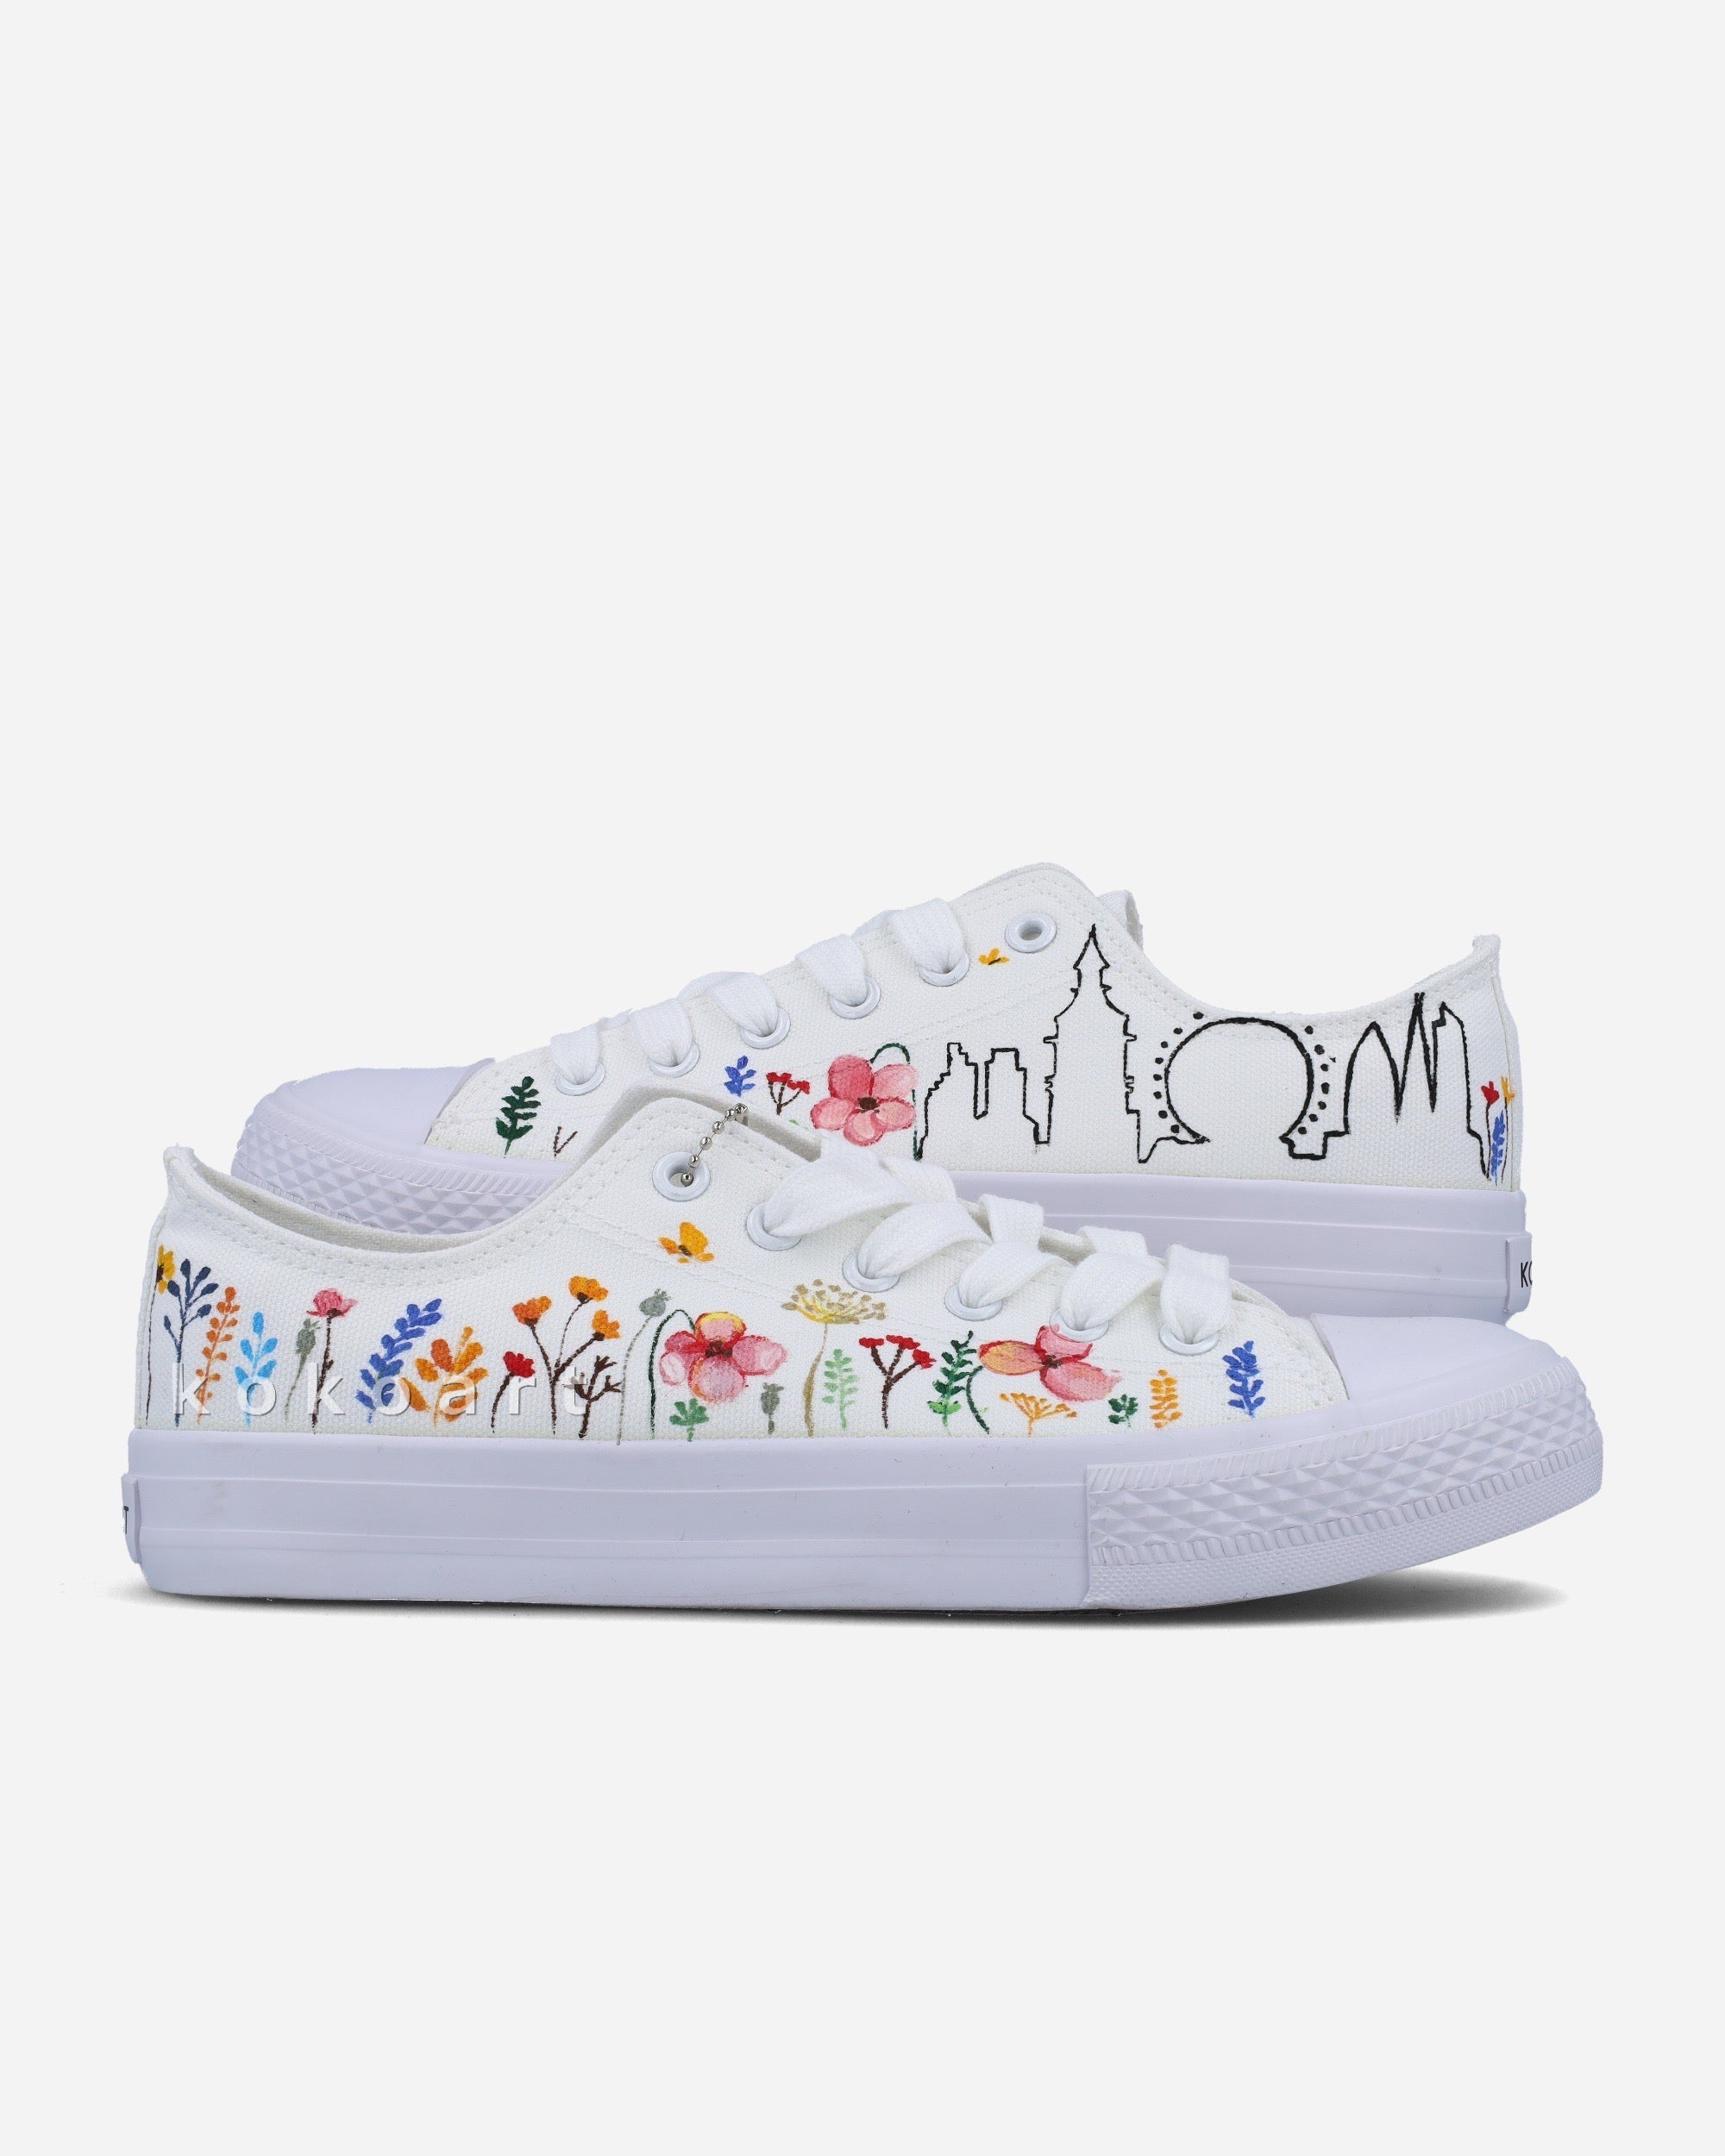 London Floral Skyline Hand Painted Shoes